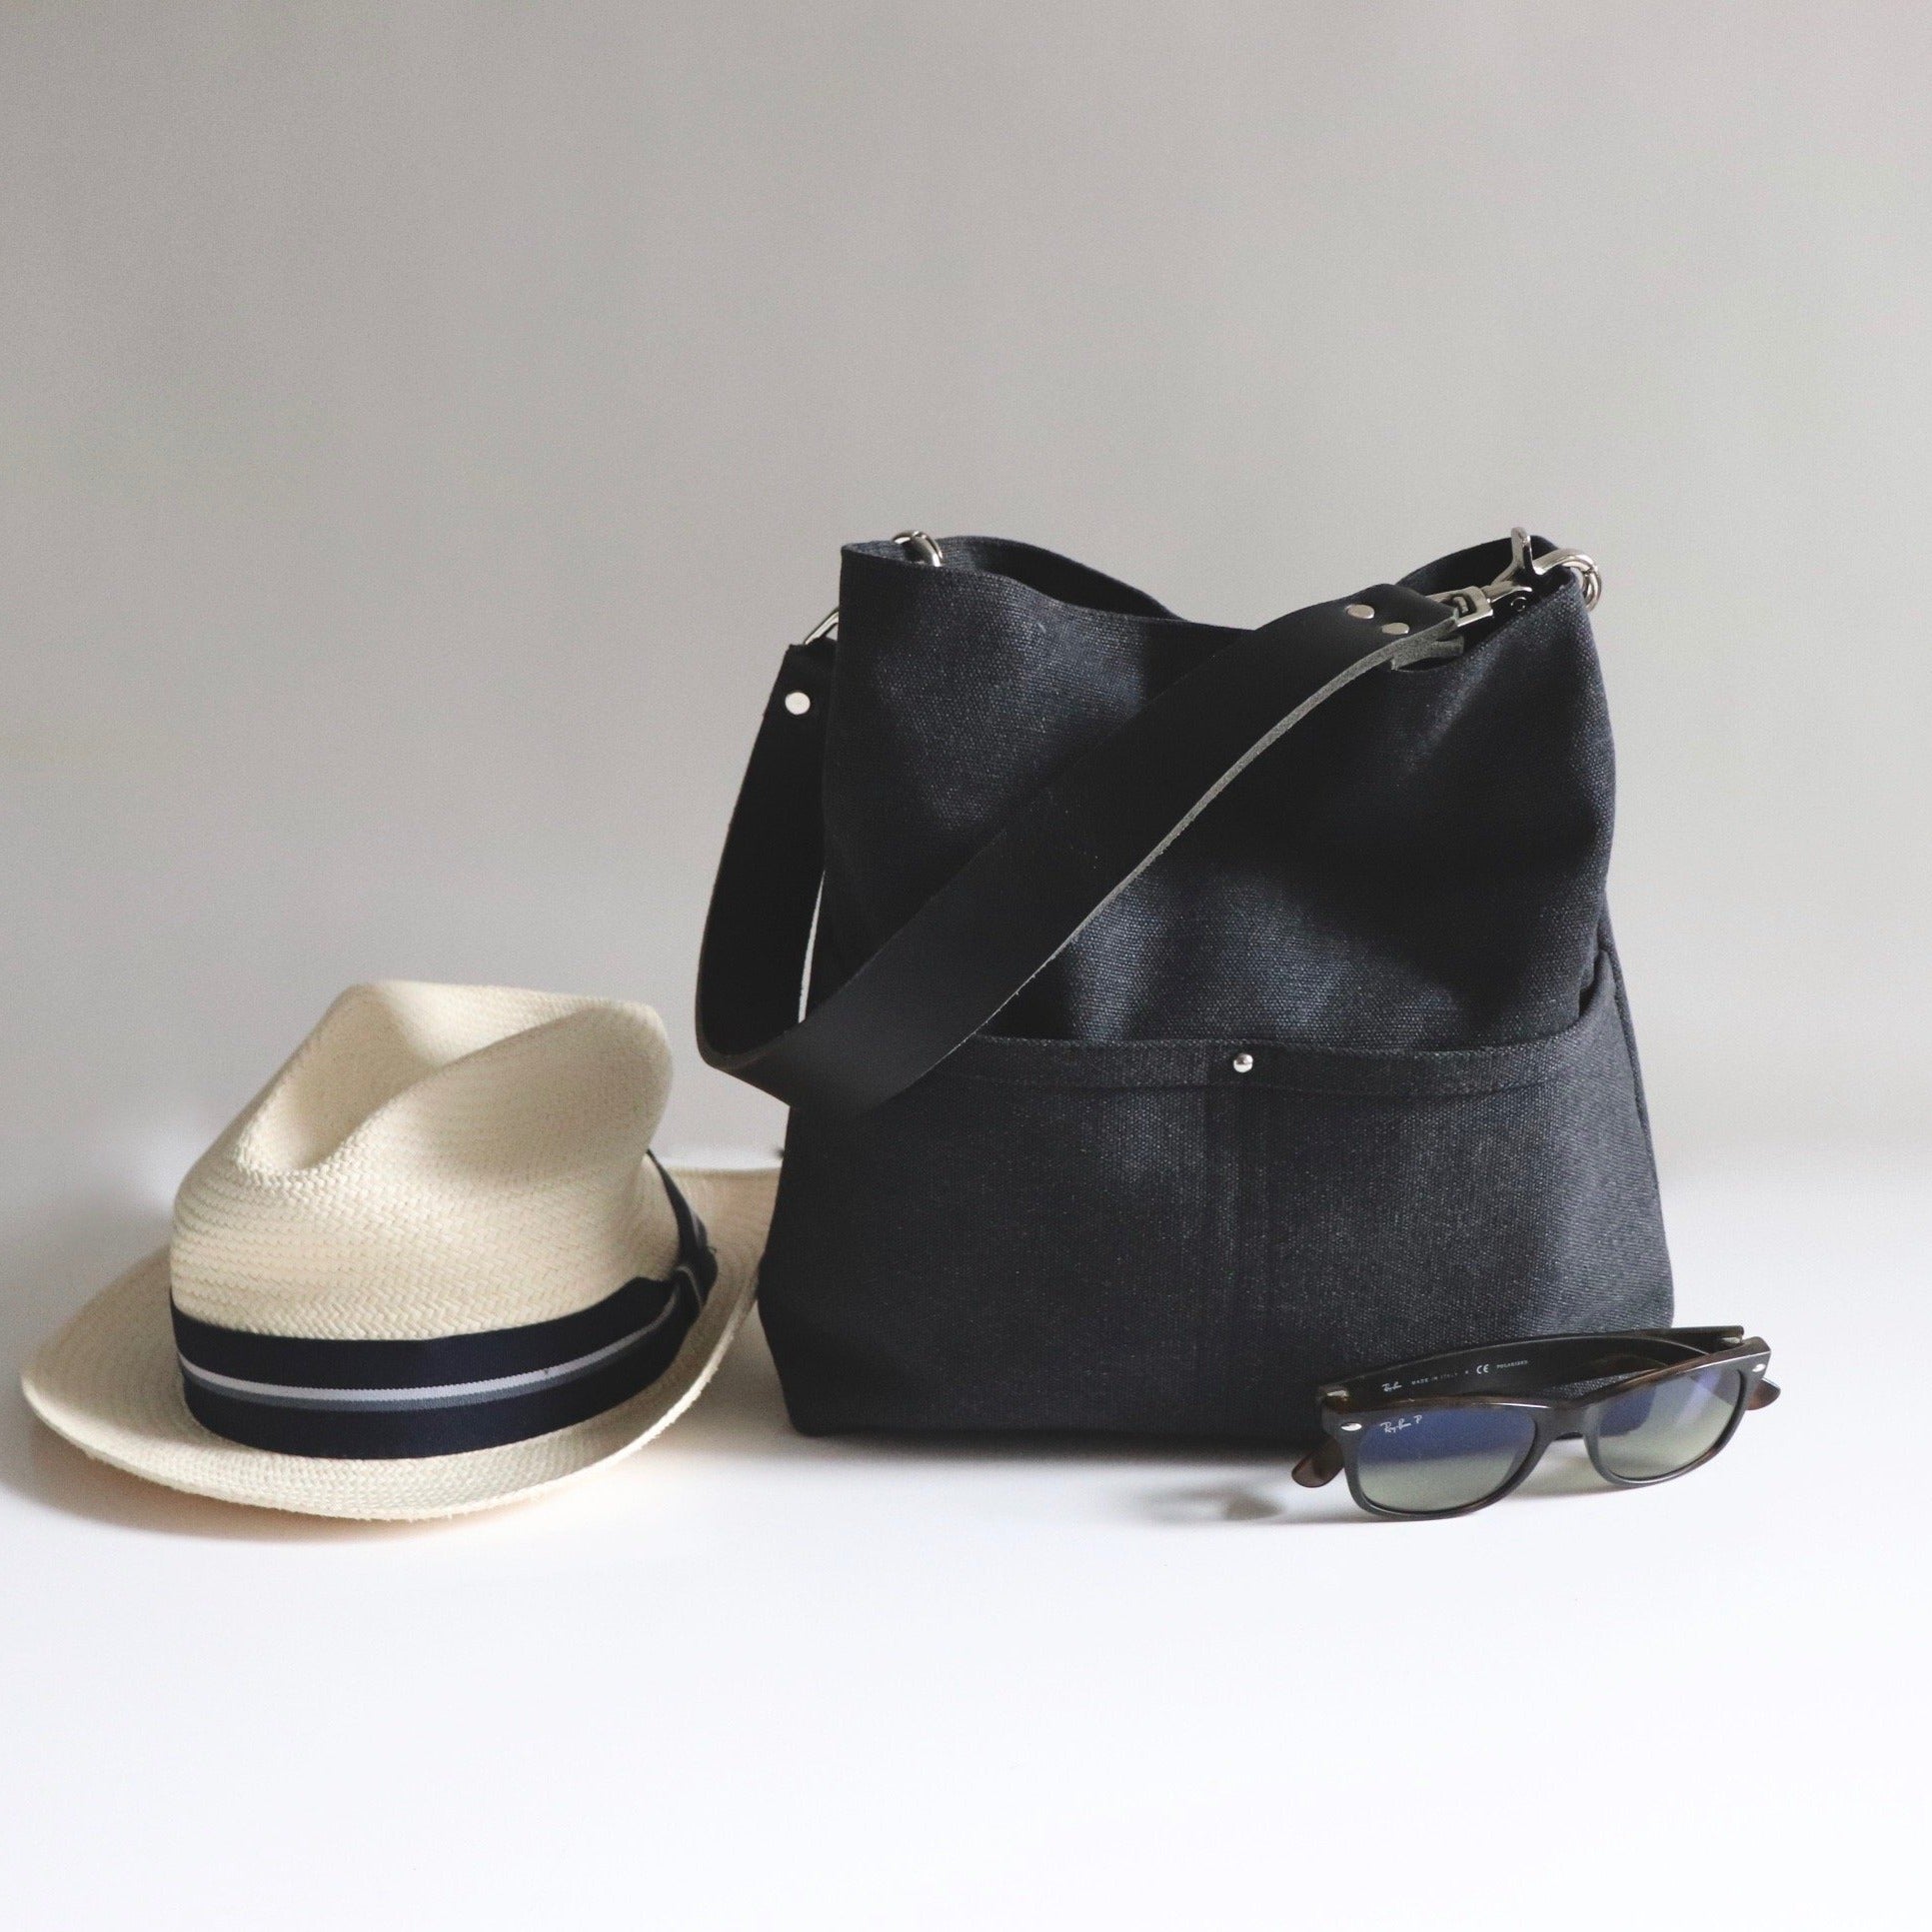 Modern Hobo Bags – Independent Reign